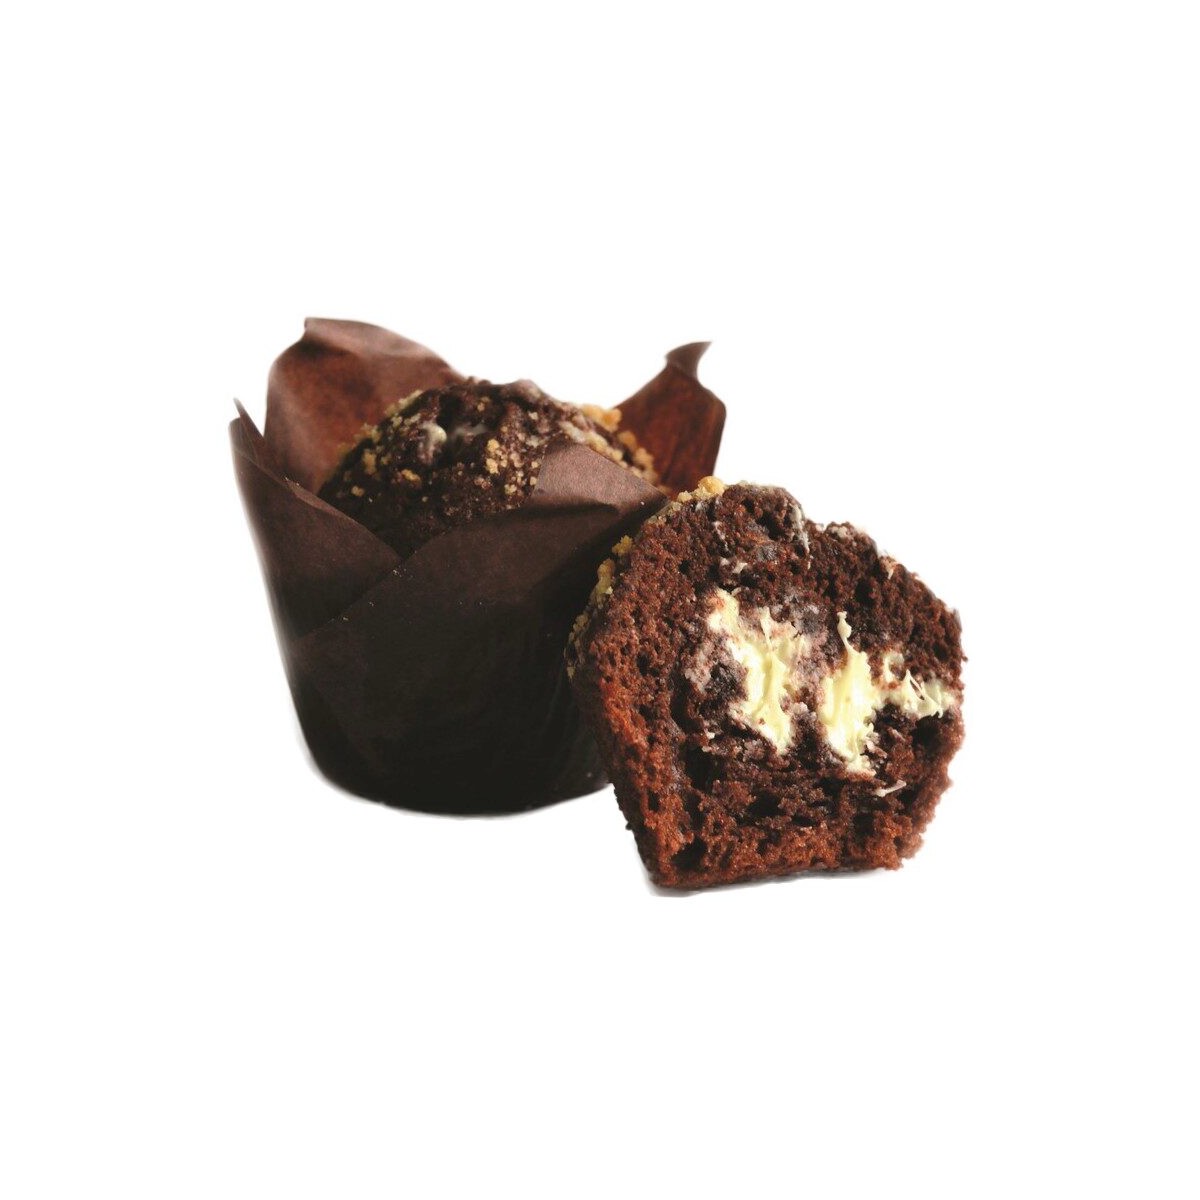 DELIFRANCE 75116 CHOCOLATE MUFFIN WITH WHITE CHOCOLATE FILLING BAKED 20X90GR BOX 